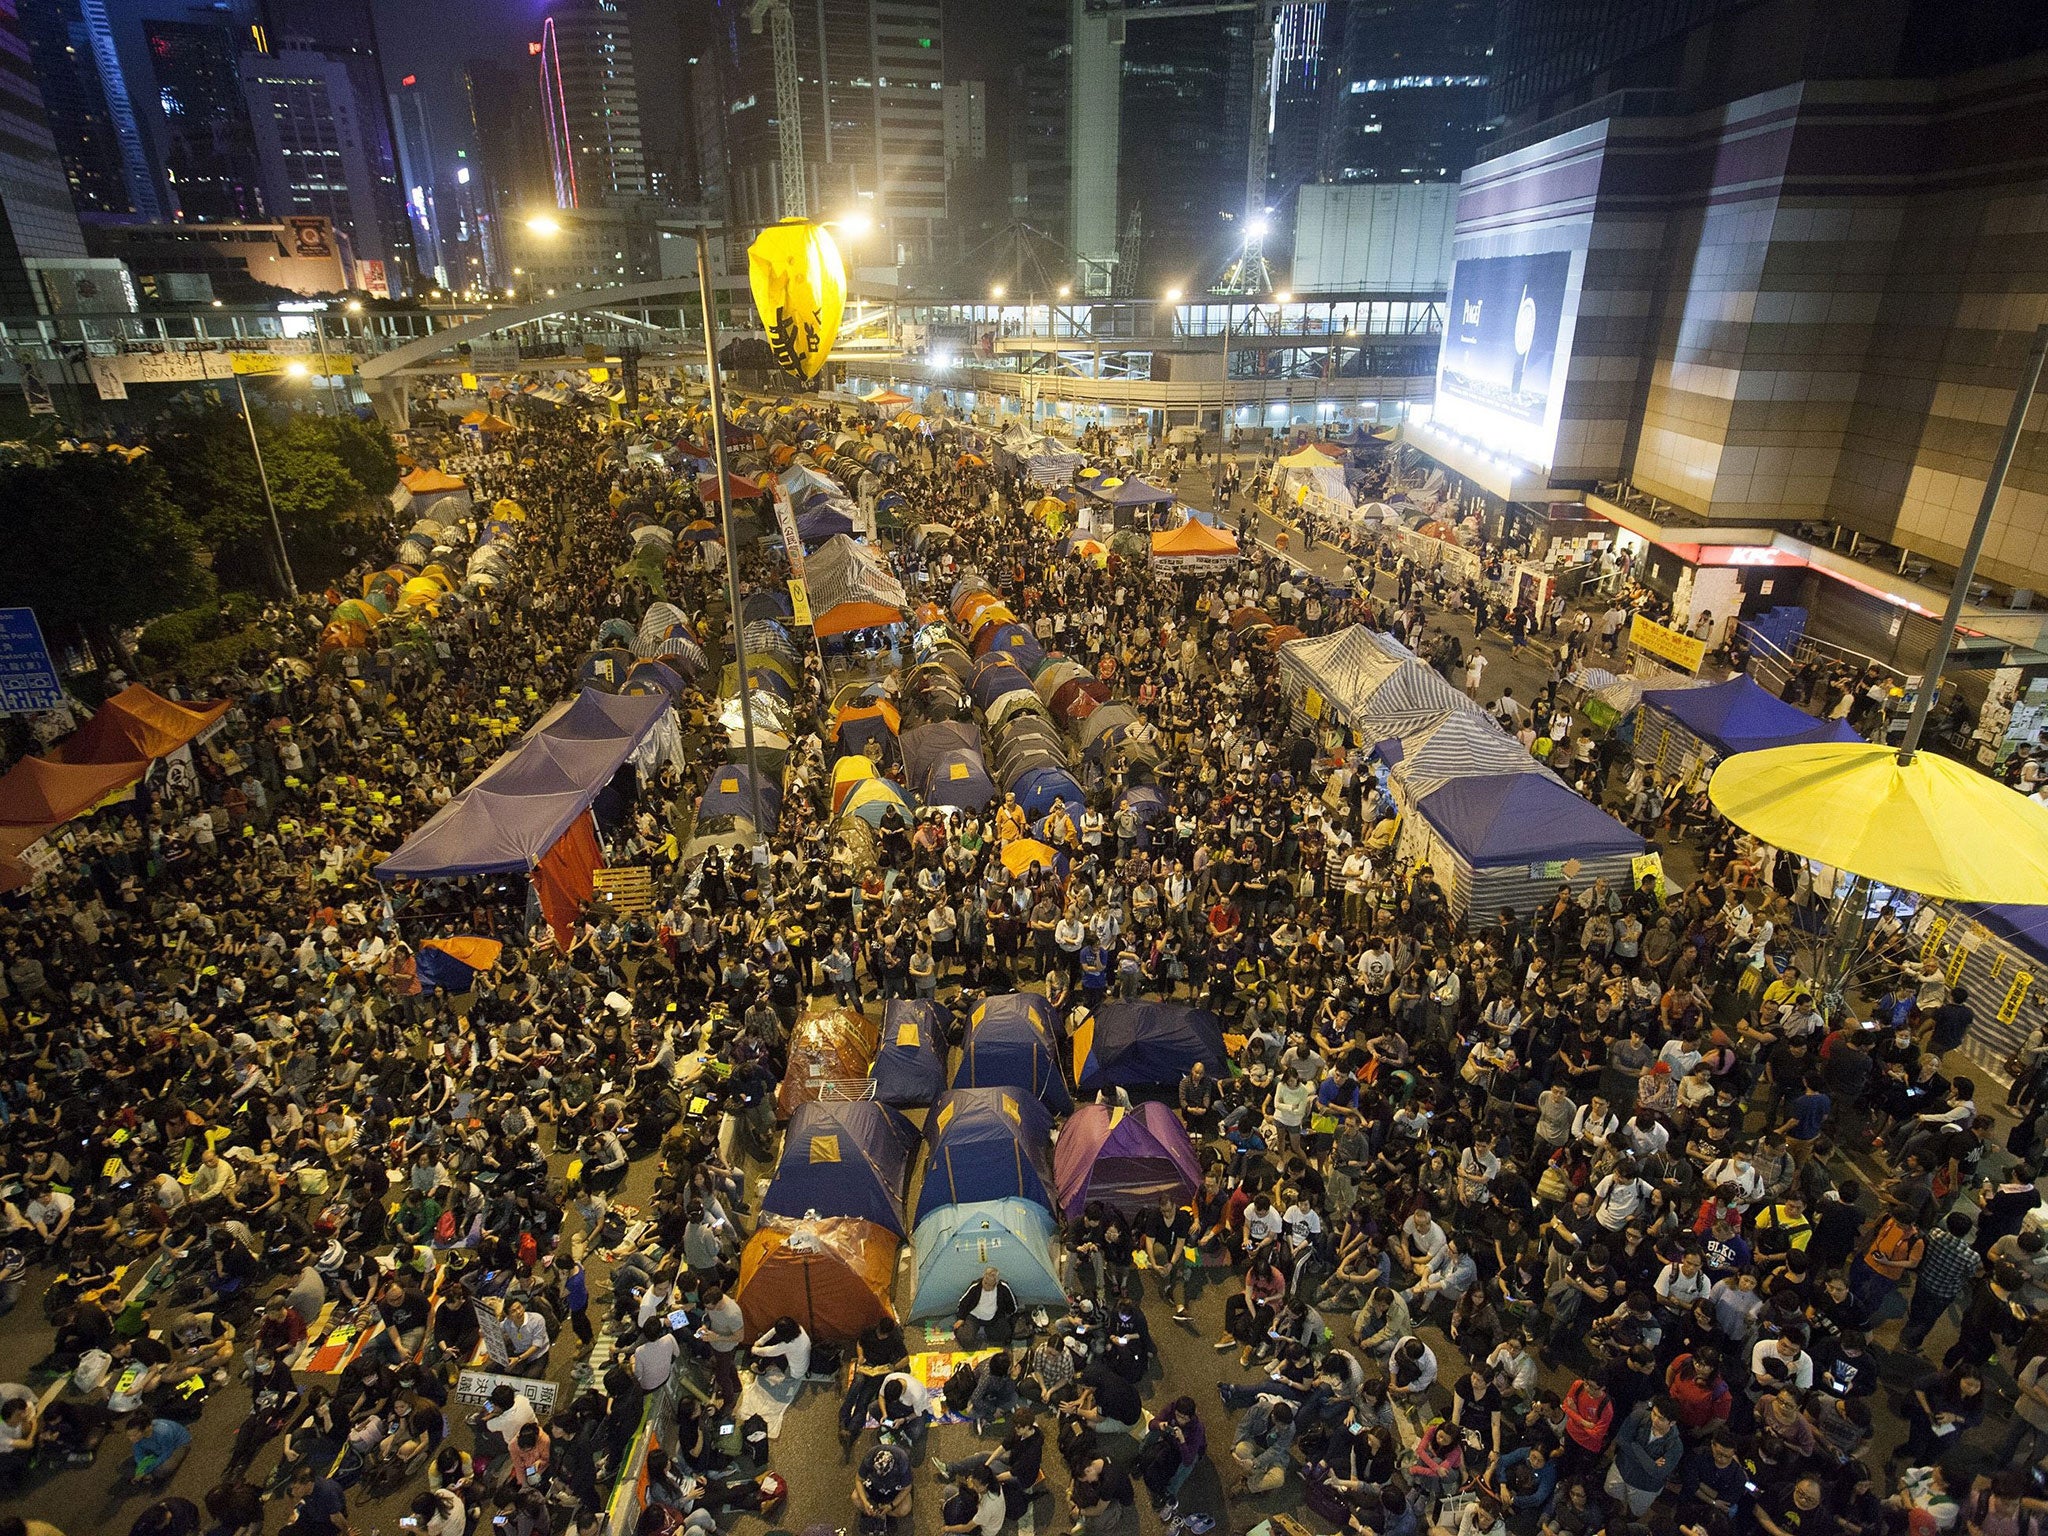 Pro-democracy student protesters in Hong Kong listen to speeches in the Occupy Central zone before clashing with police